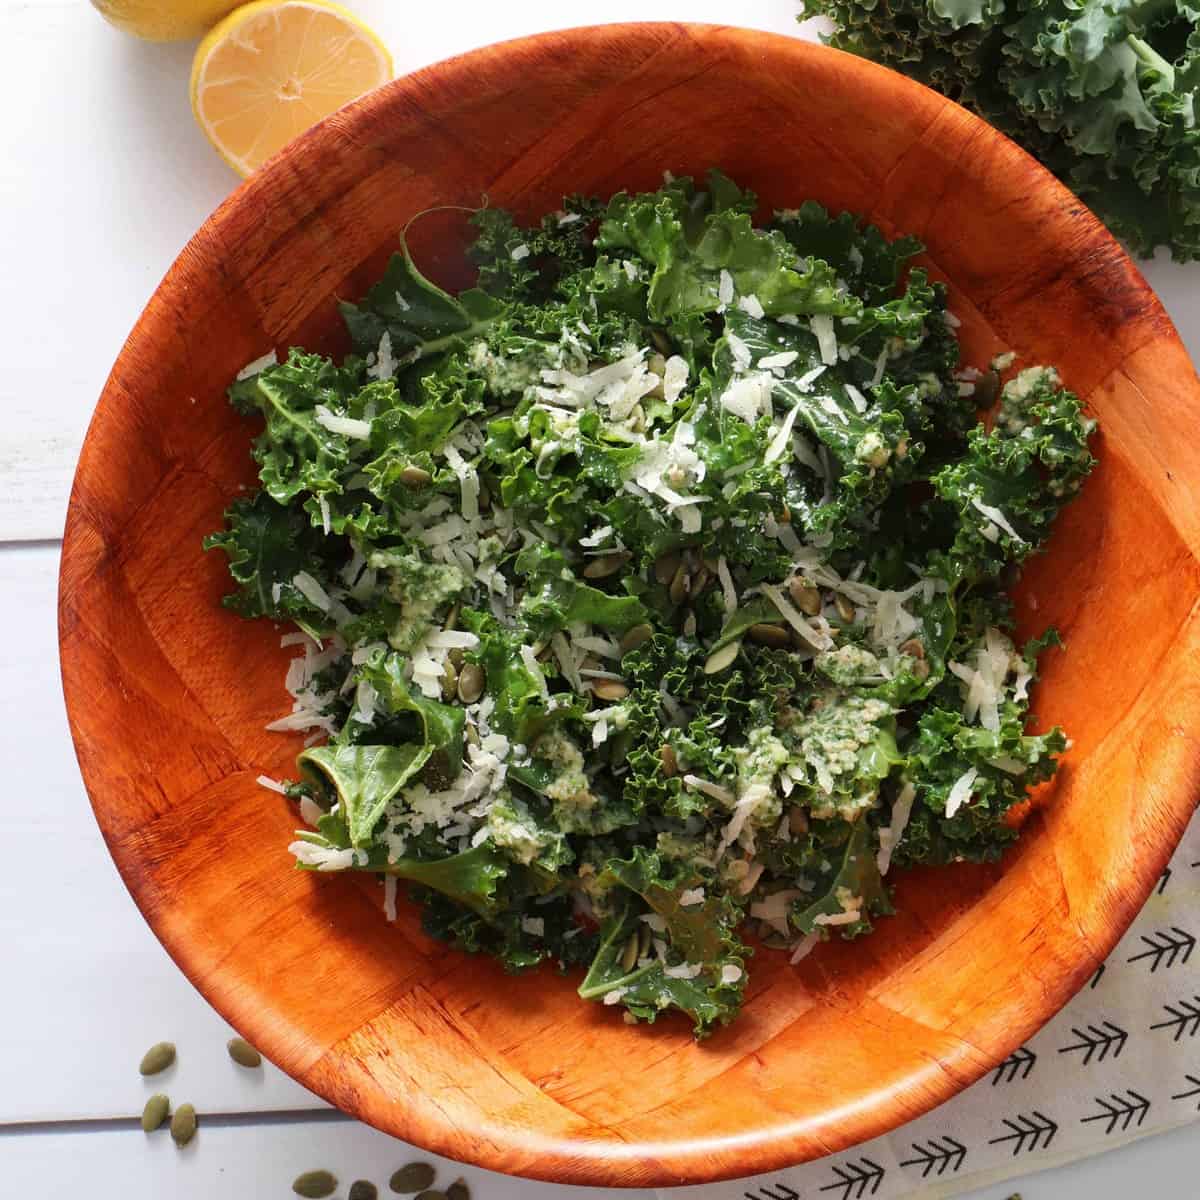 Best Kale Salad - Inspired by Il Corvo